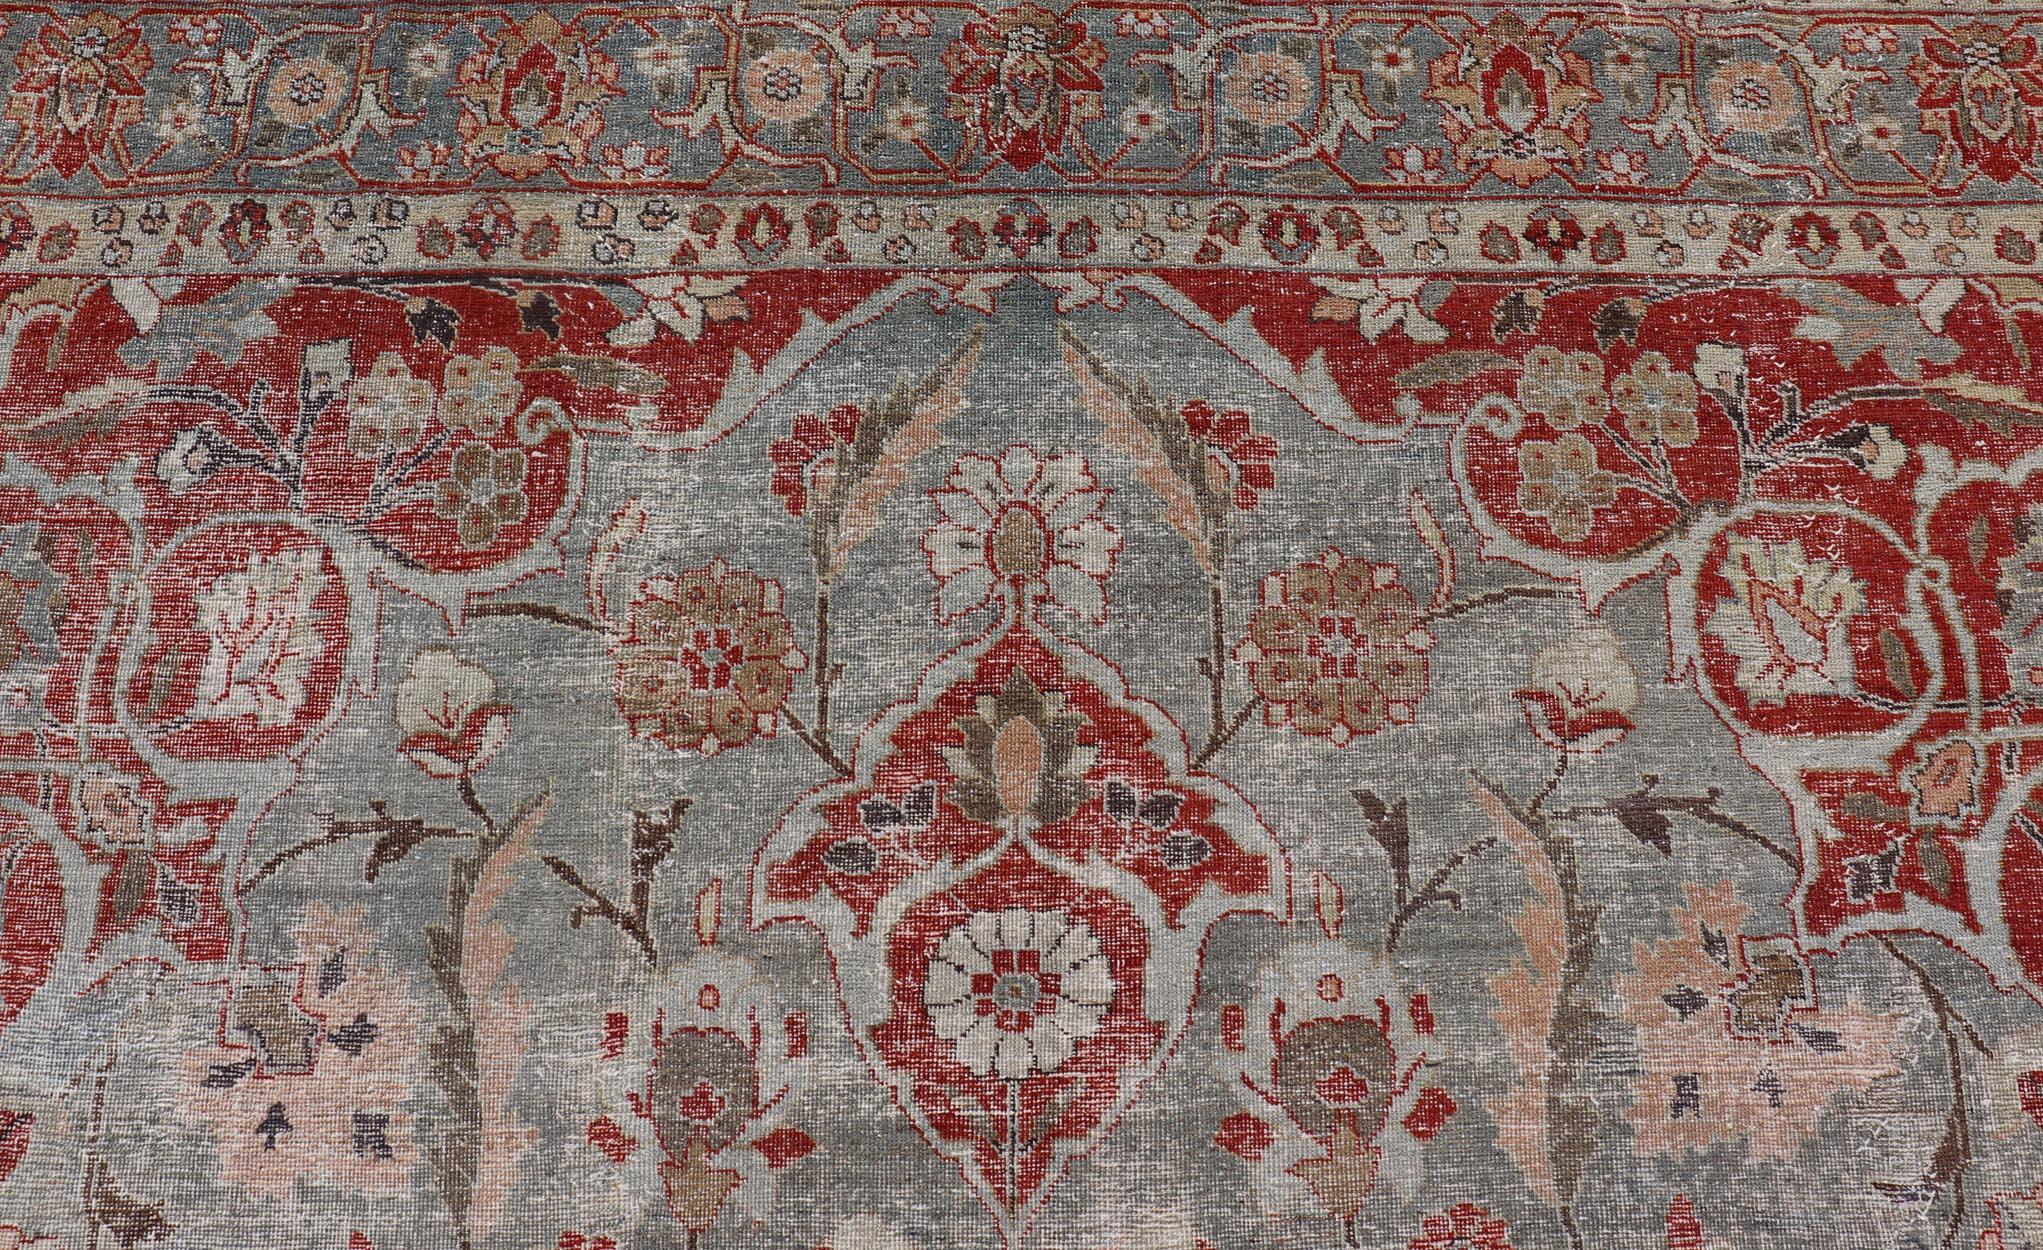 Antique Persian Tabriz Rug with Floral Medallion Design in Tan, Red, and Lt Blue For Sale 2